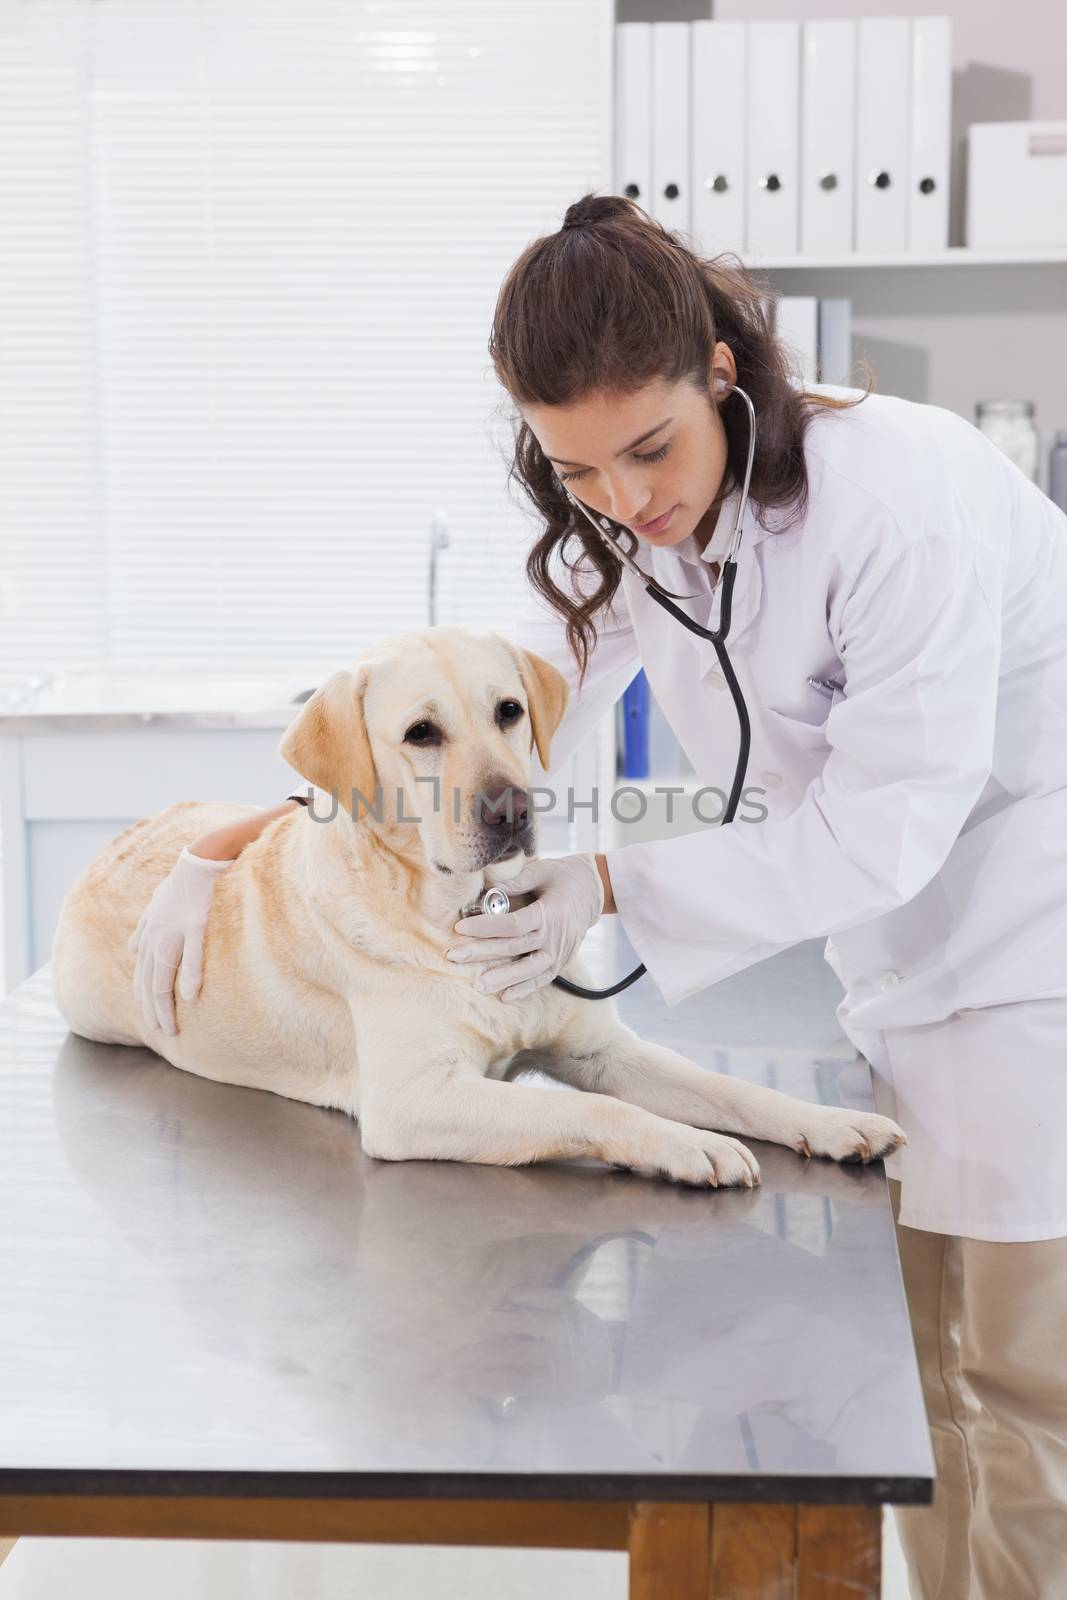 Vet examining a dog with stethoscope in medical office